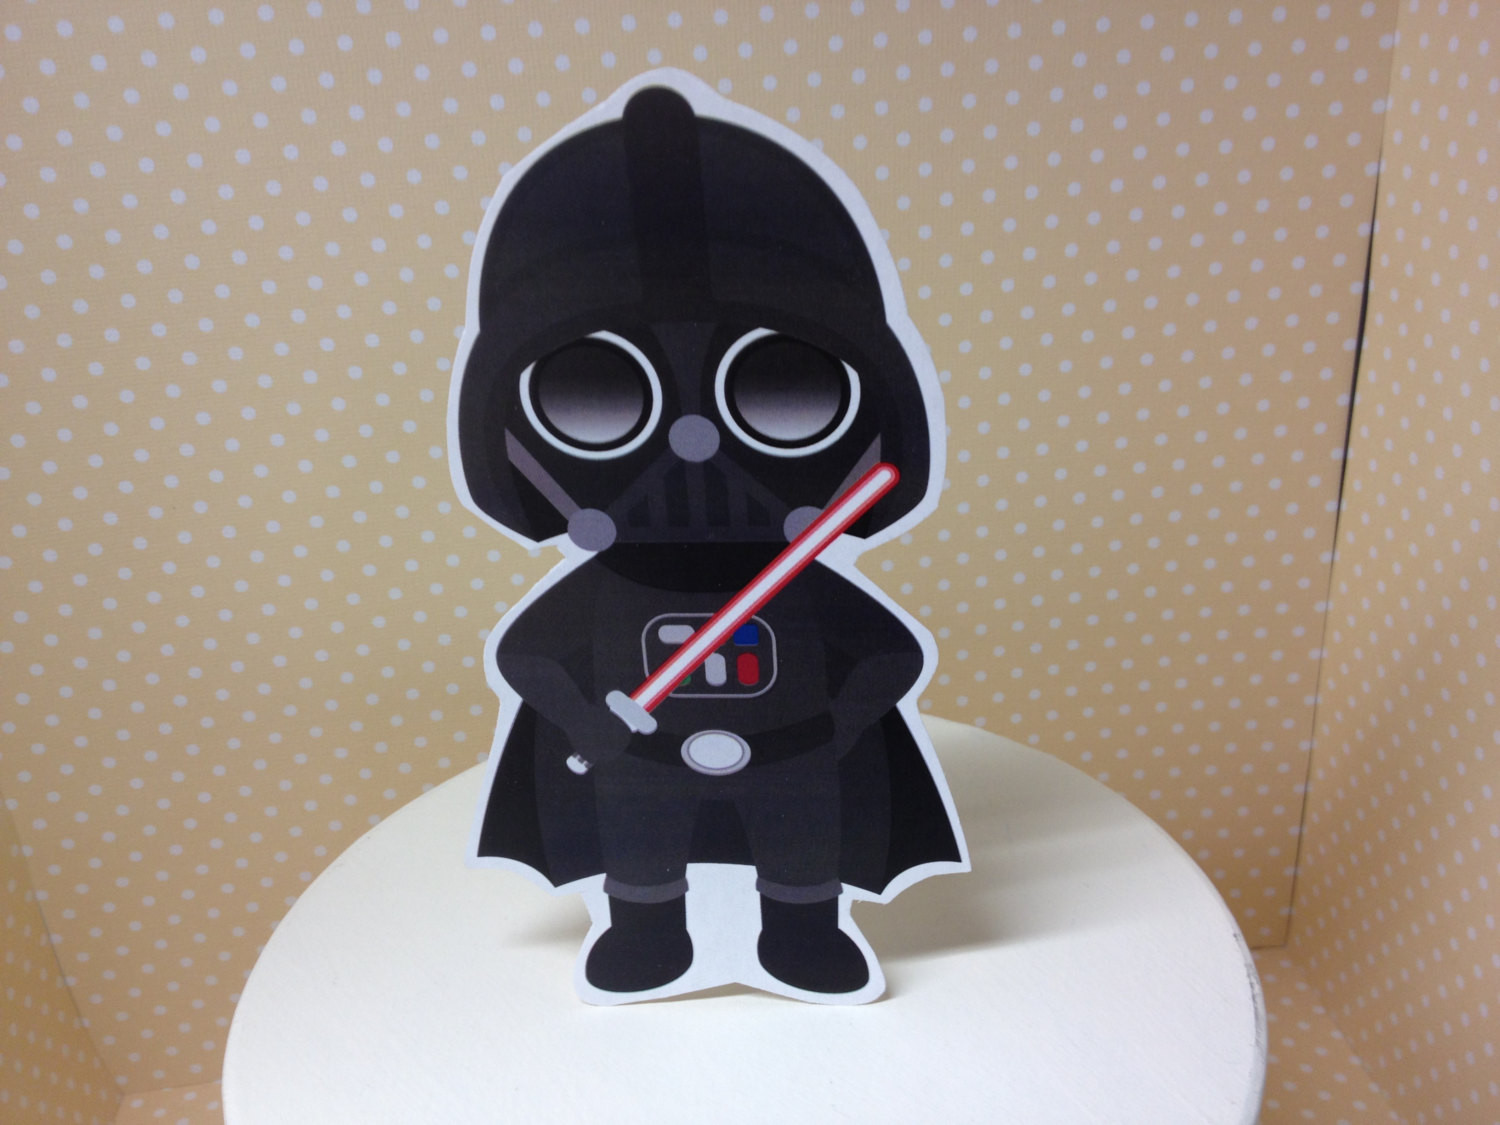 Star Wars Birthday Cake Toppers
 Star Wars Cake Topper Decoration